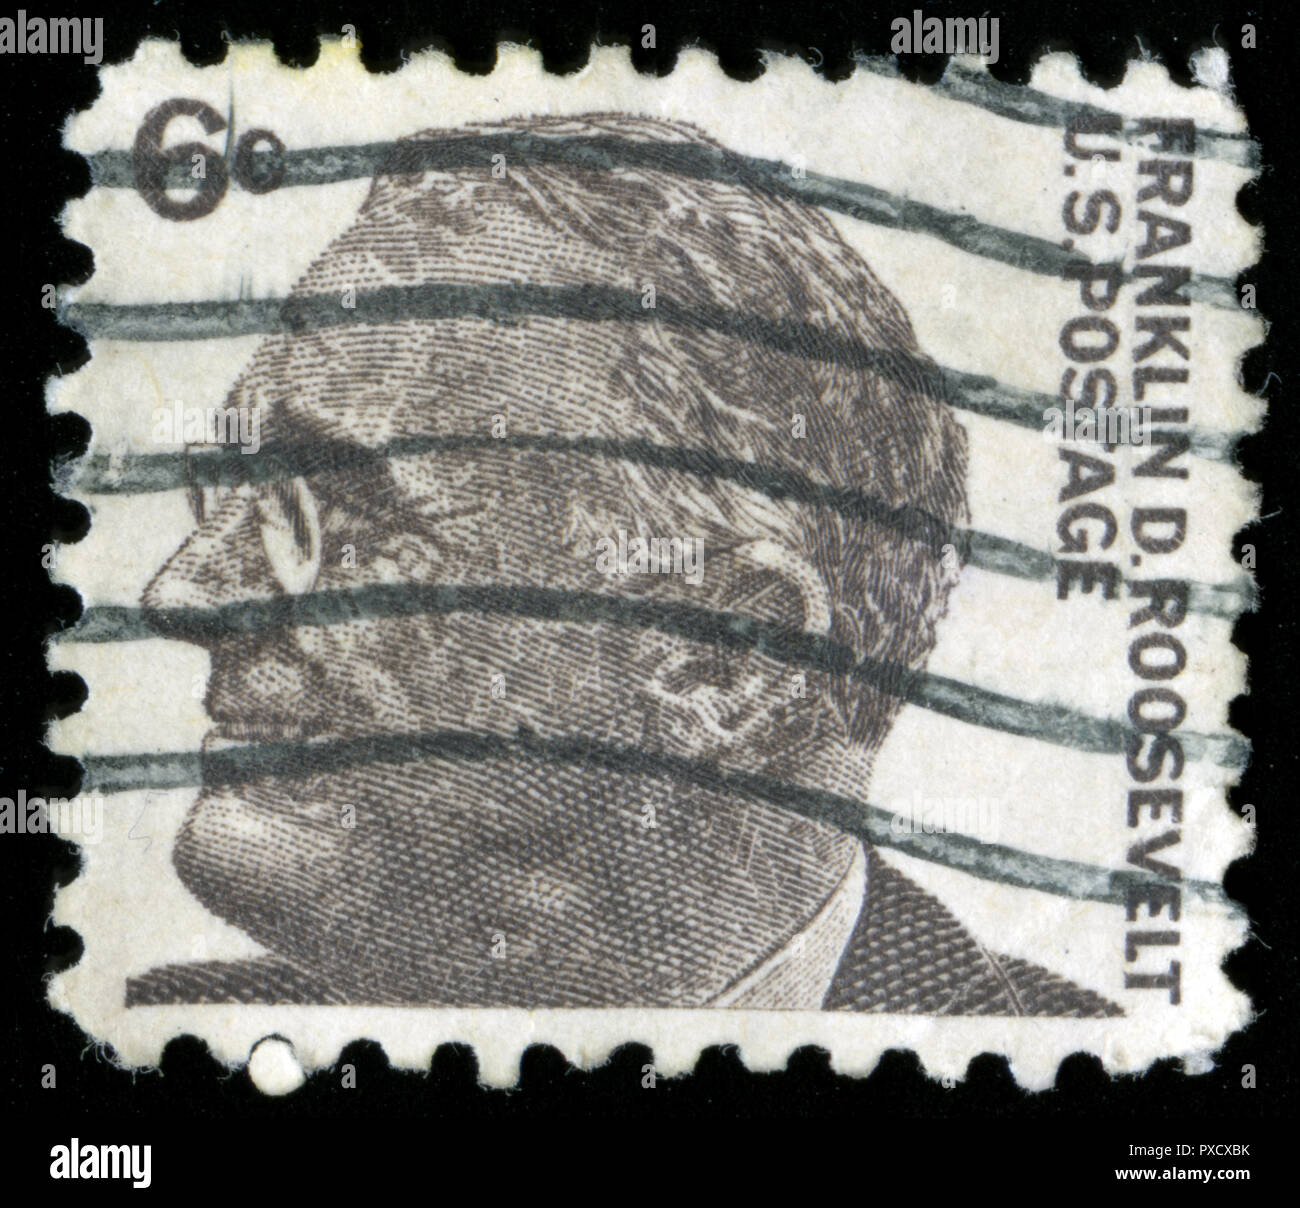 Postmarked stamp from United States of America (USA) in the Famous Americans series issued in 1967 Stock Photo